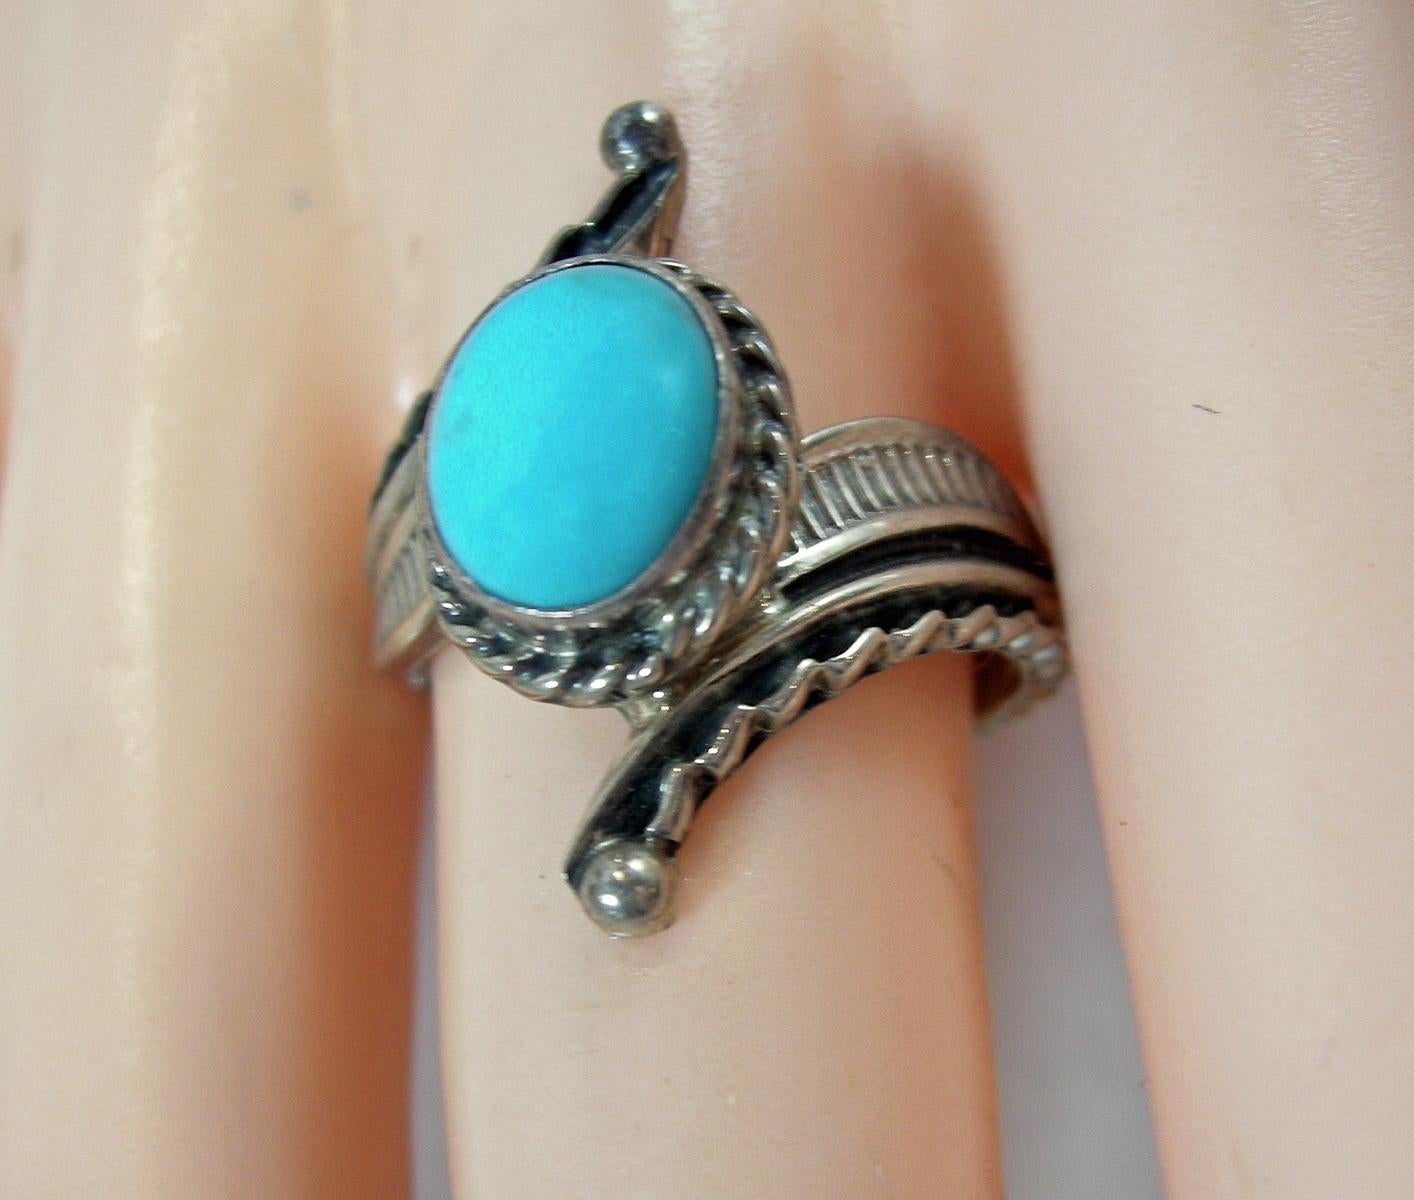 This vintage Navajo-American Indian ring by Raymond Delgarito features a turquoise stone in a heavily carved sterling silver setting.  A size 9-1/2, this ring measures 1” wide across the top and is in excellent condition.